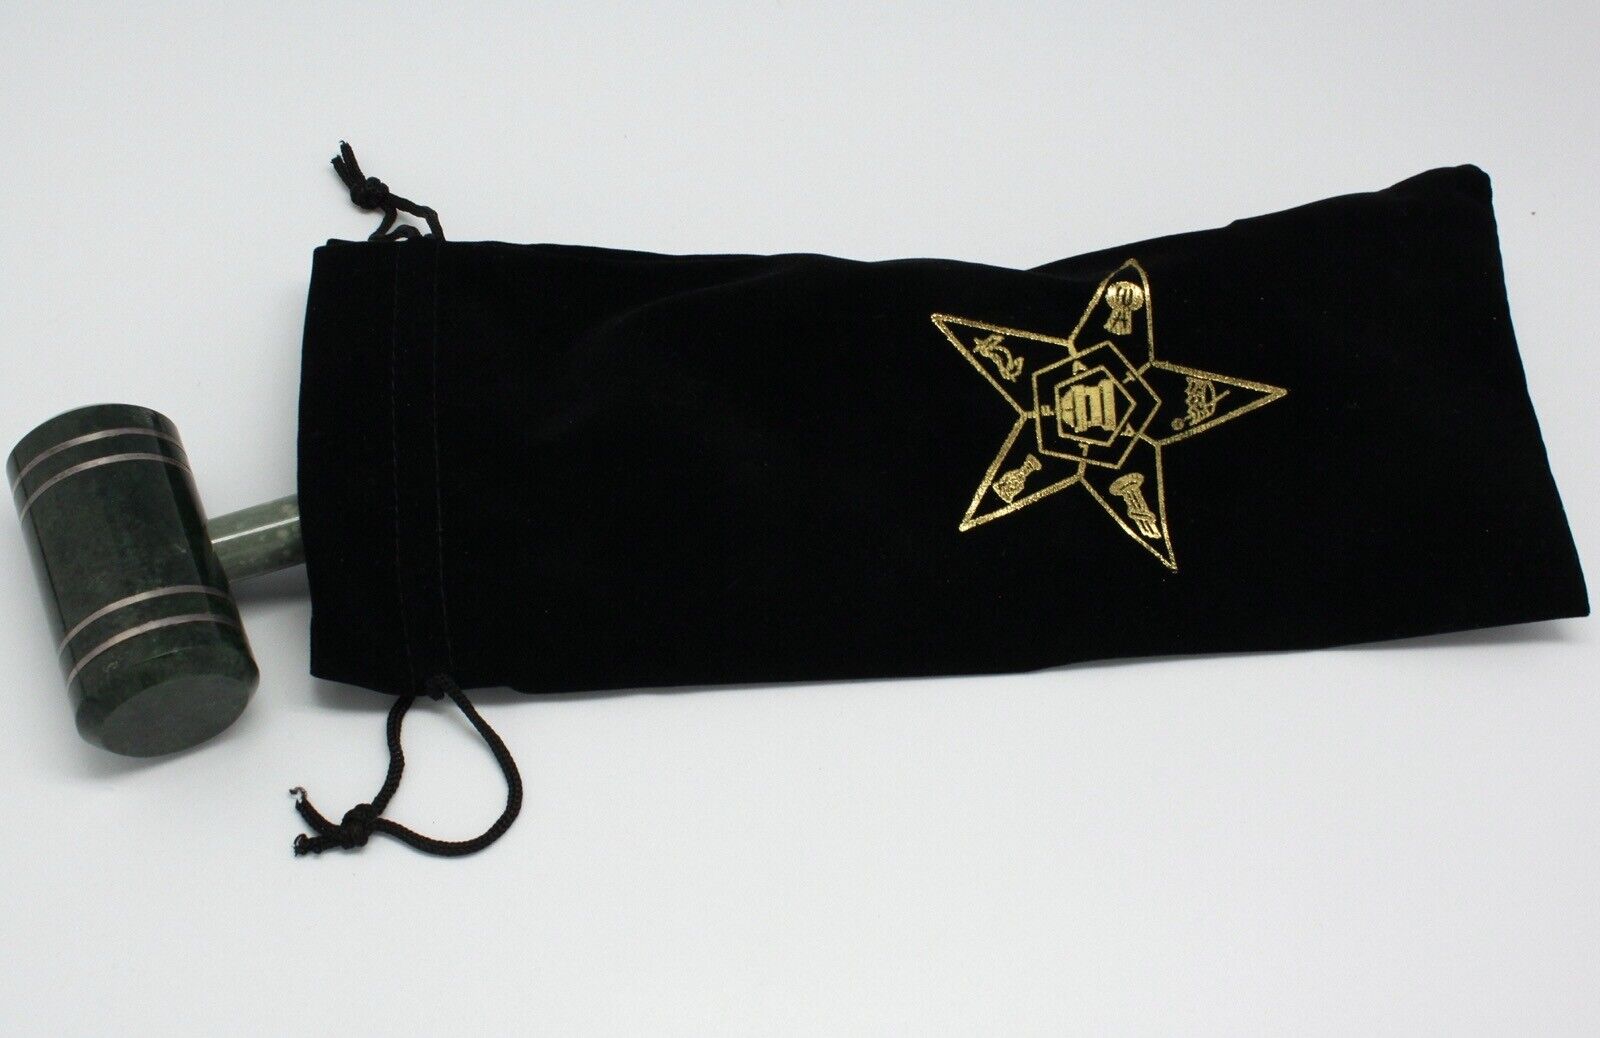 Order of the Eastern Star OES Gavel Storage Bag (GAVEL NOT INCLUDED)